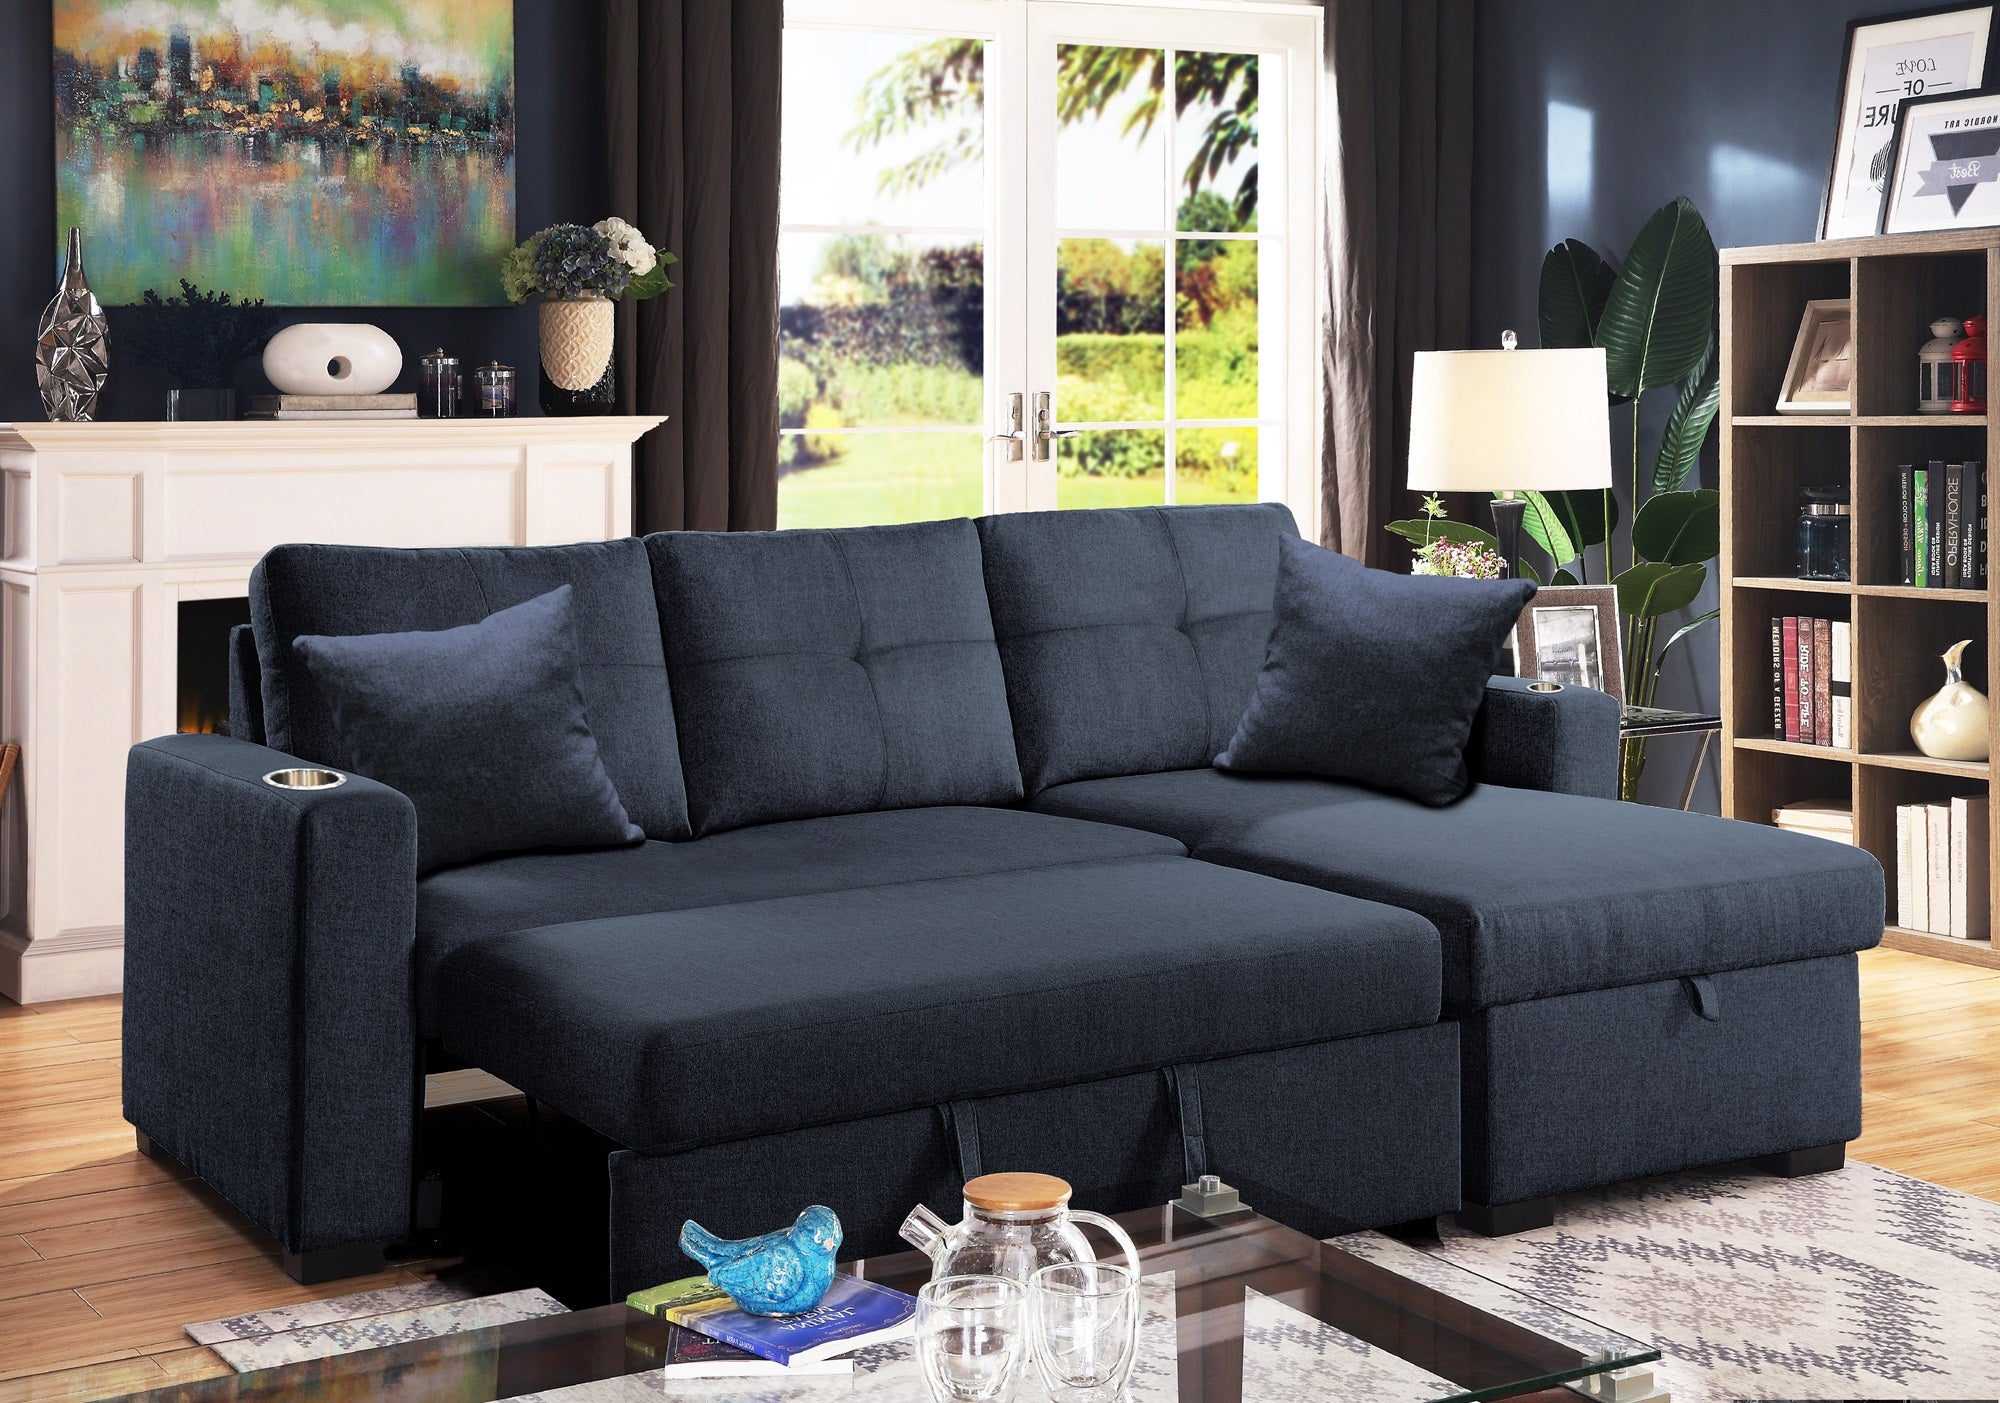  Samson 3-seater fabric sofa bed with chaise lounge in a living room setting.